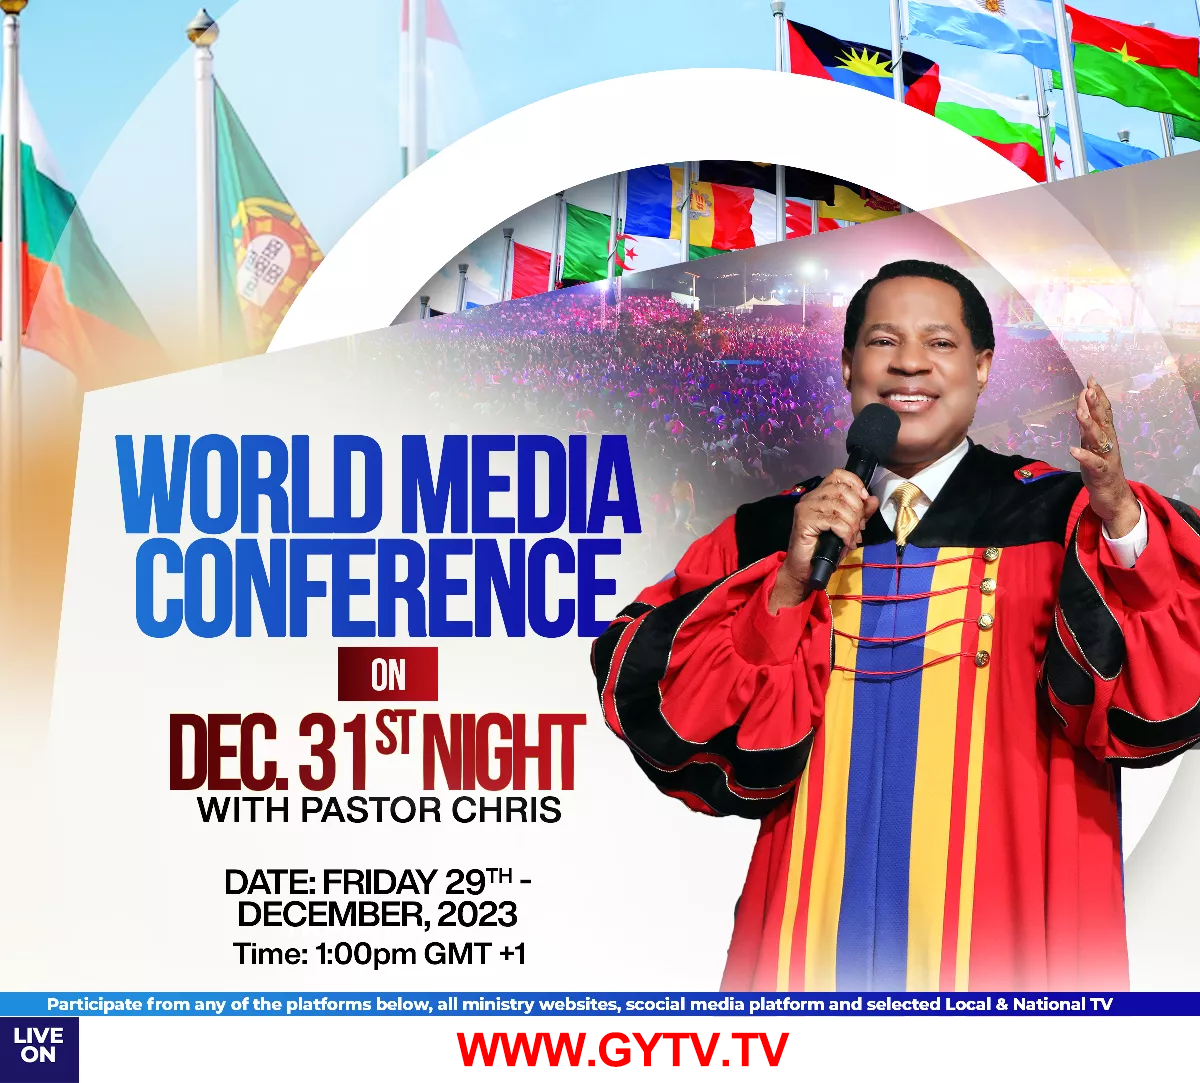 World Media Conference on 31st December Night with Pastor Chris